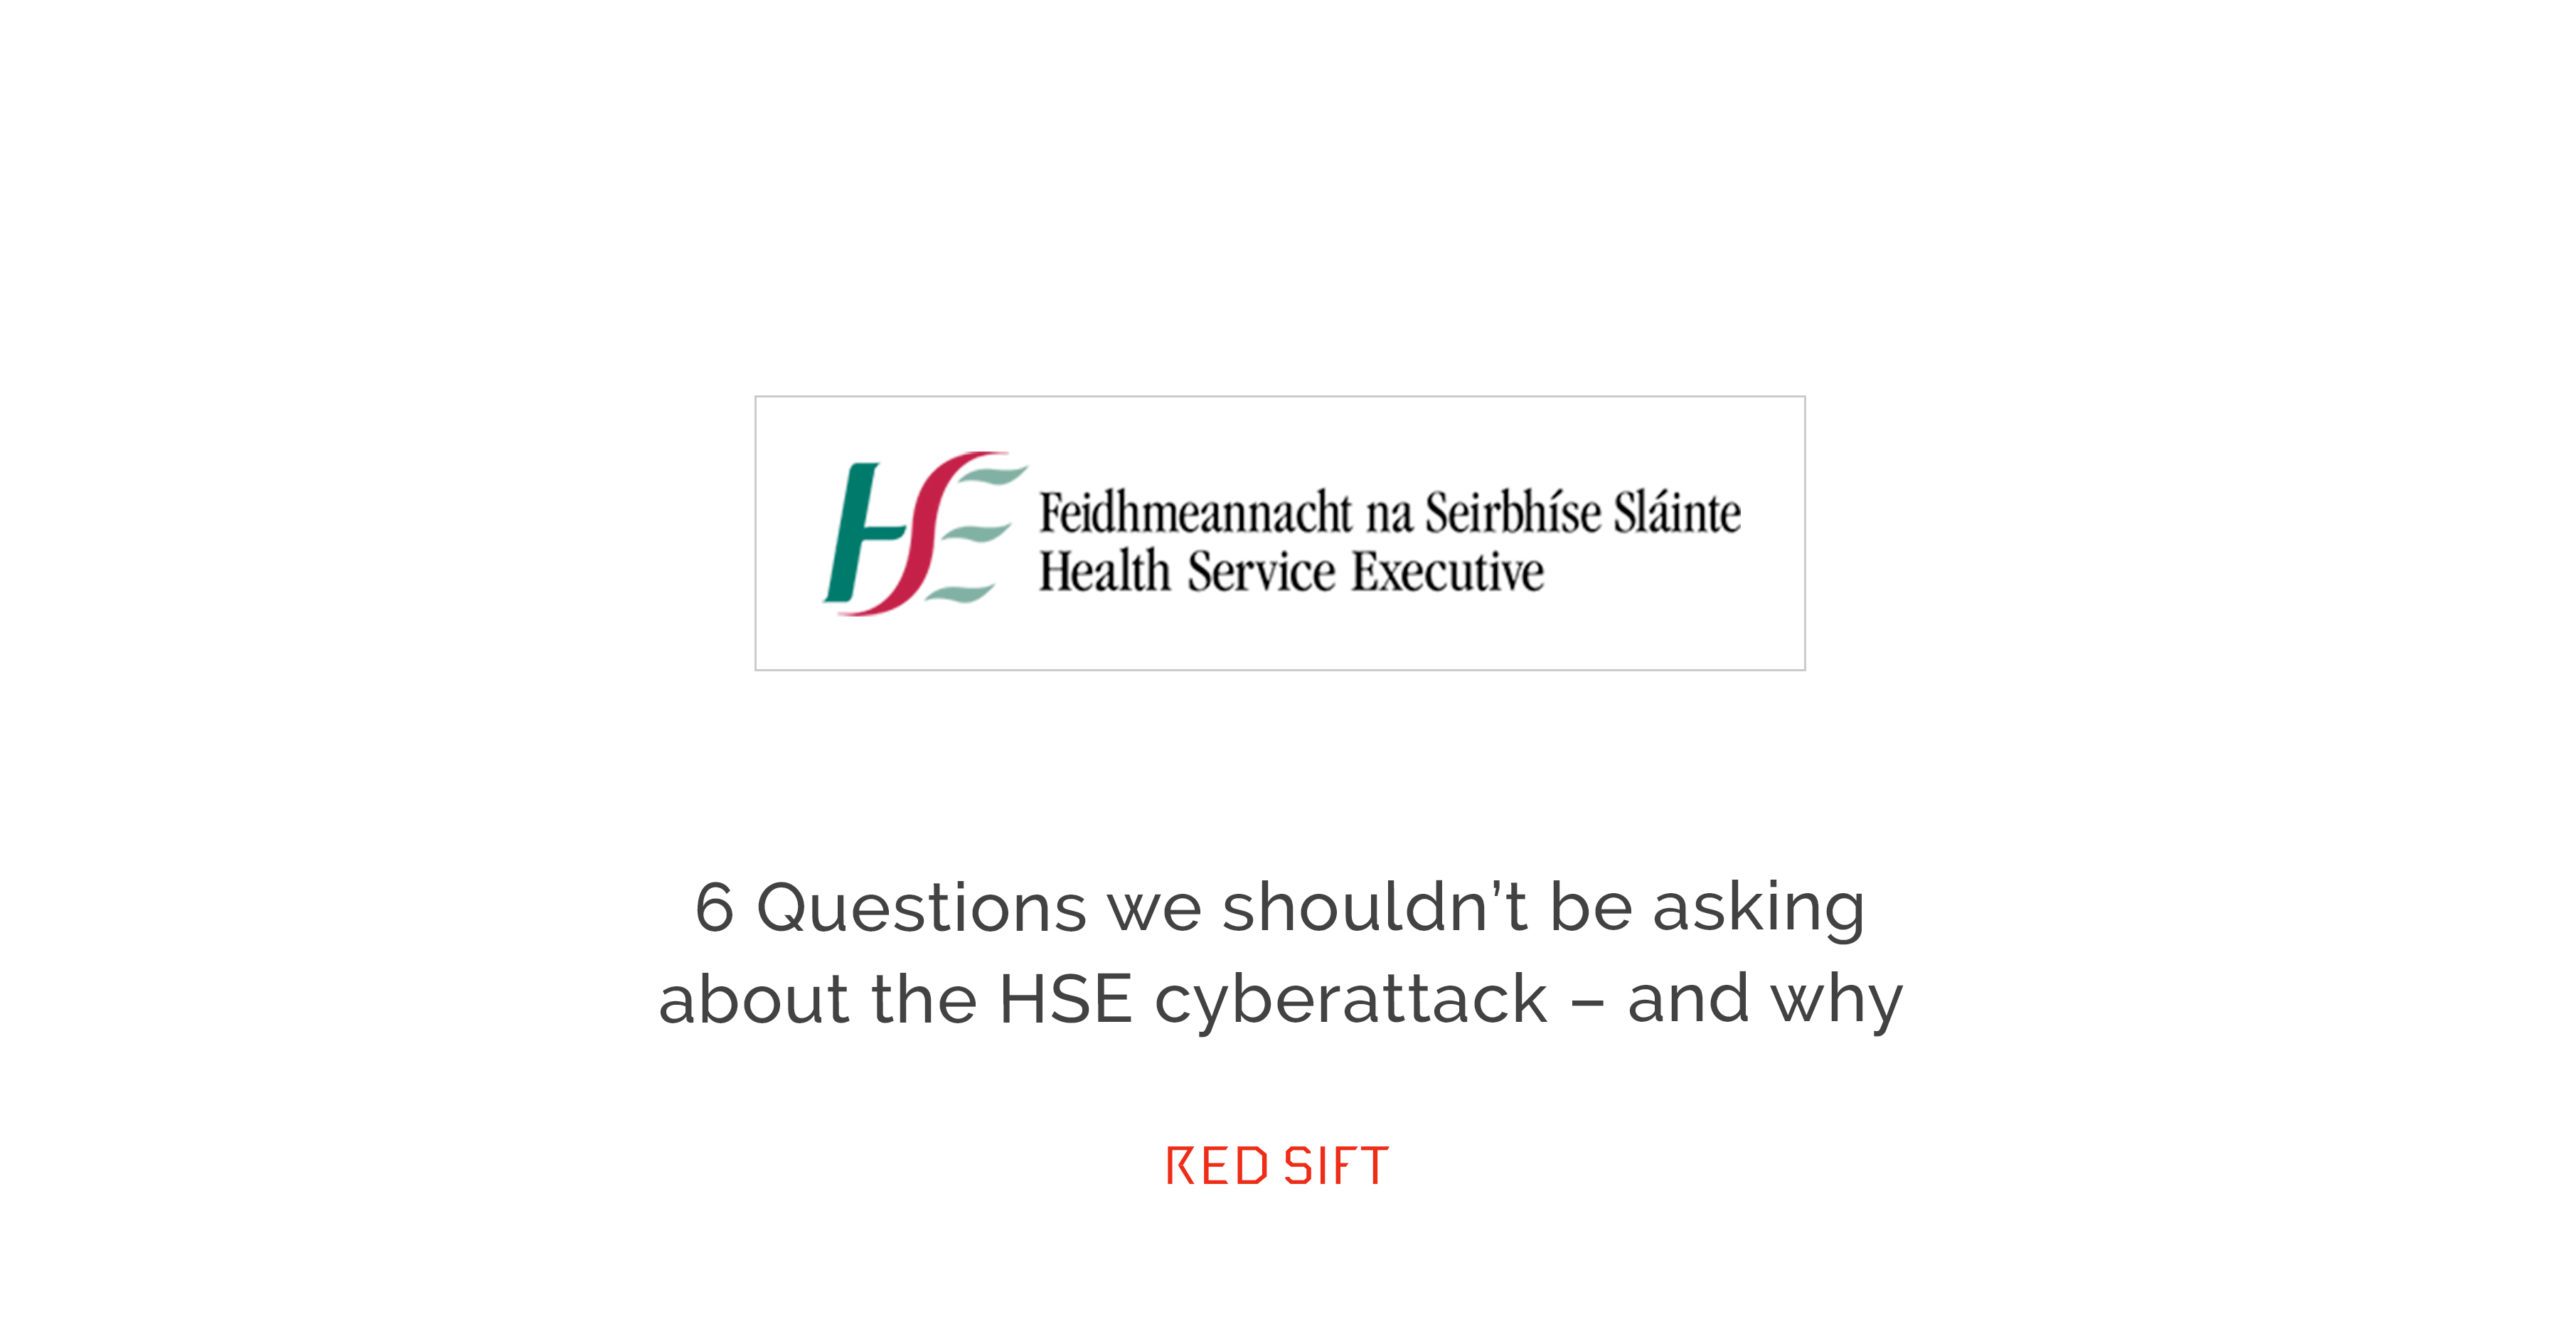 6-questions-not-to-ask-cyberattack-HSE-ireland